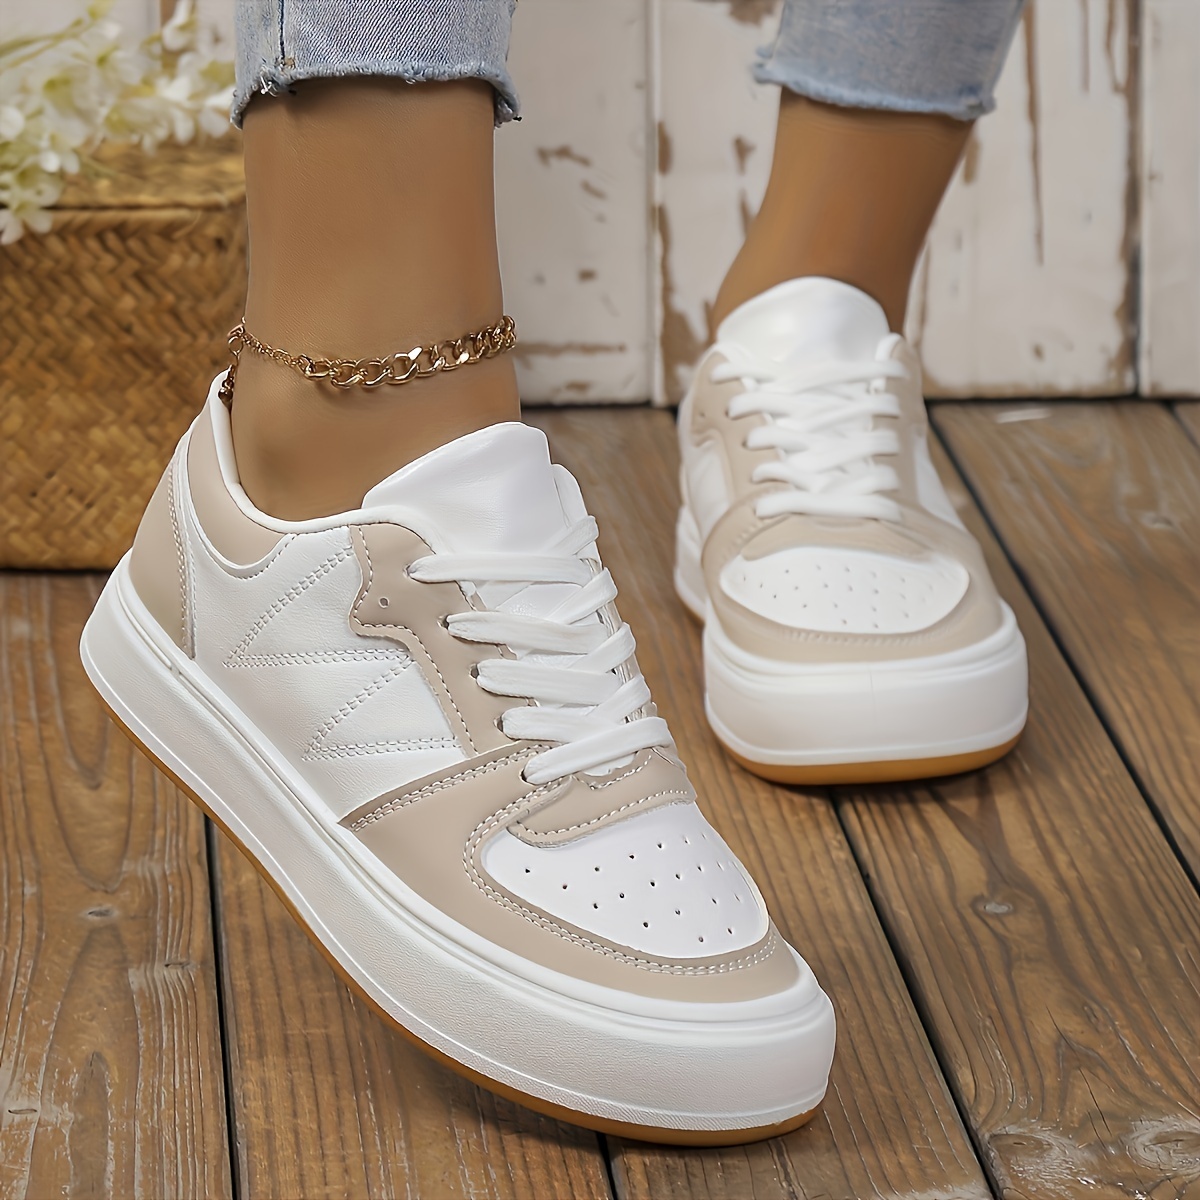 

Women's Contrast Color Casual Sneakers, Lace Up Platform Soft Sole Walking Skate Shoes, Breathable Low-top Trainers